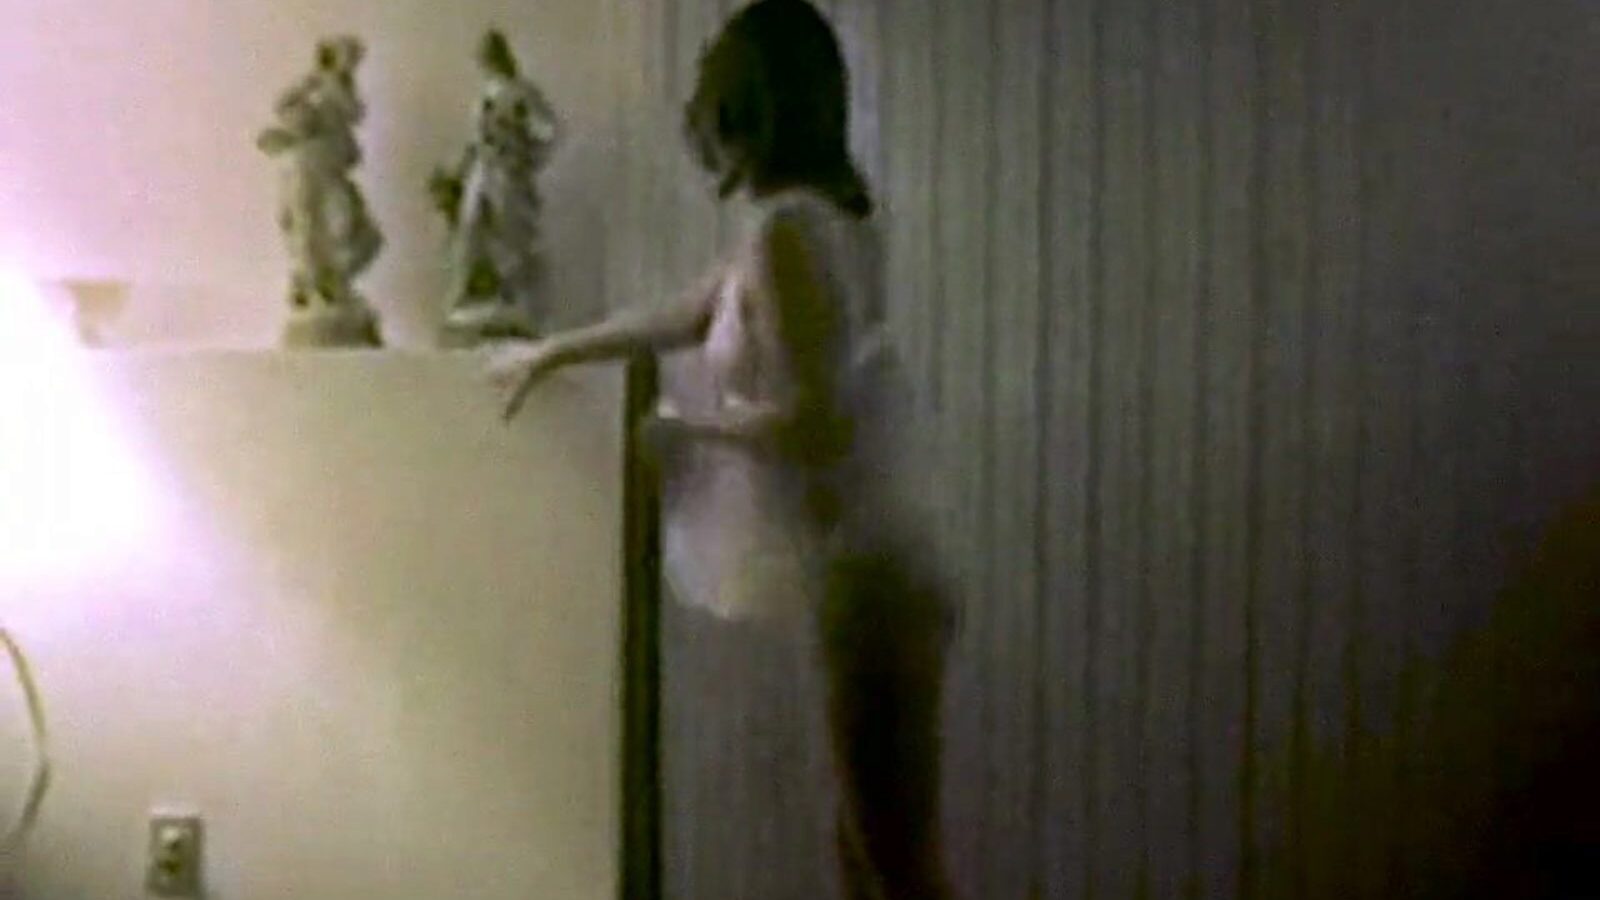 My Sharona - Vintage 80's Hairy Beauty Striptease Dance Watch My Sharona - Vintage 80's Hairy Beauty Striptease Dance episode on xHamster - the ultimate bevy of free-for-all My Xxx & Beauty Tube HD pornography tube videos